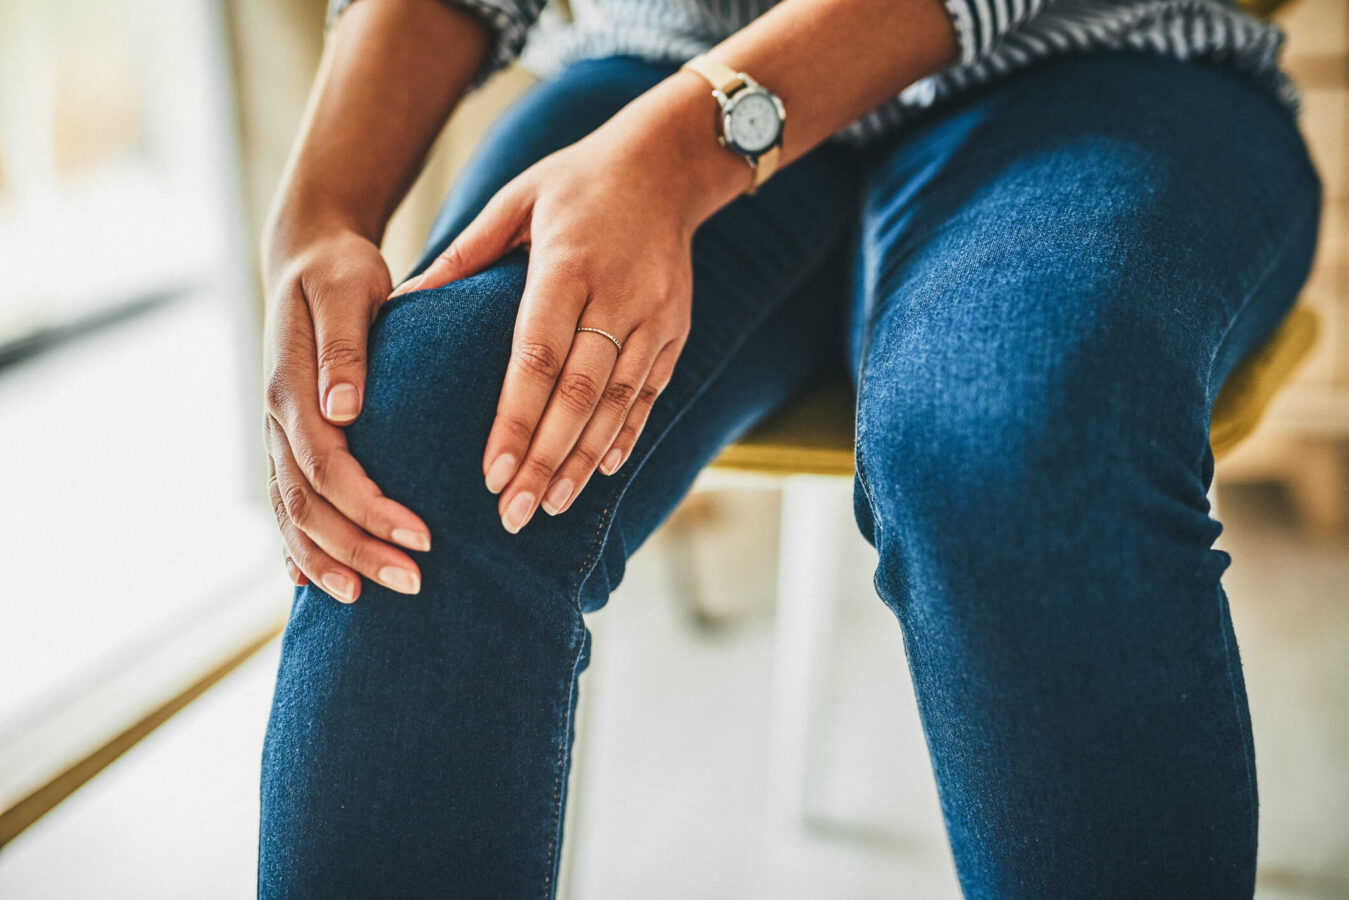 How to Tell if Your Knee Pain is Serious